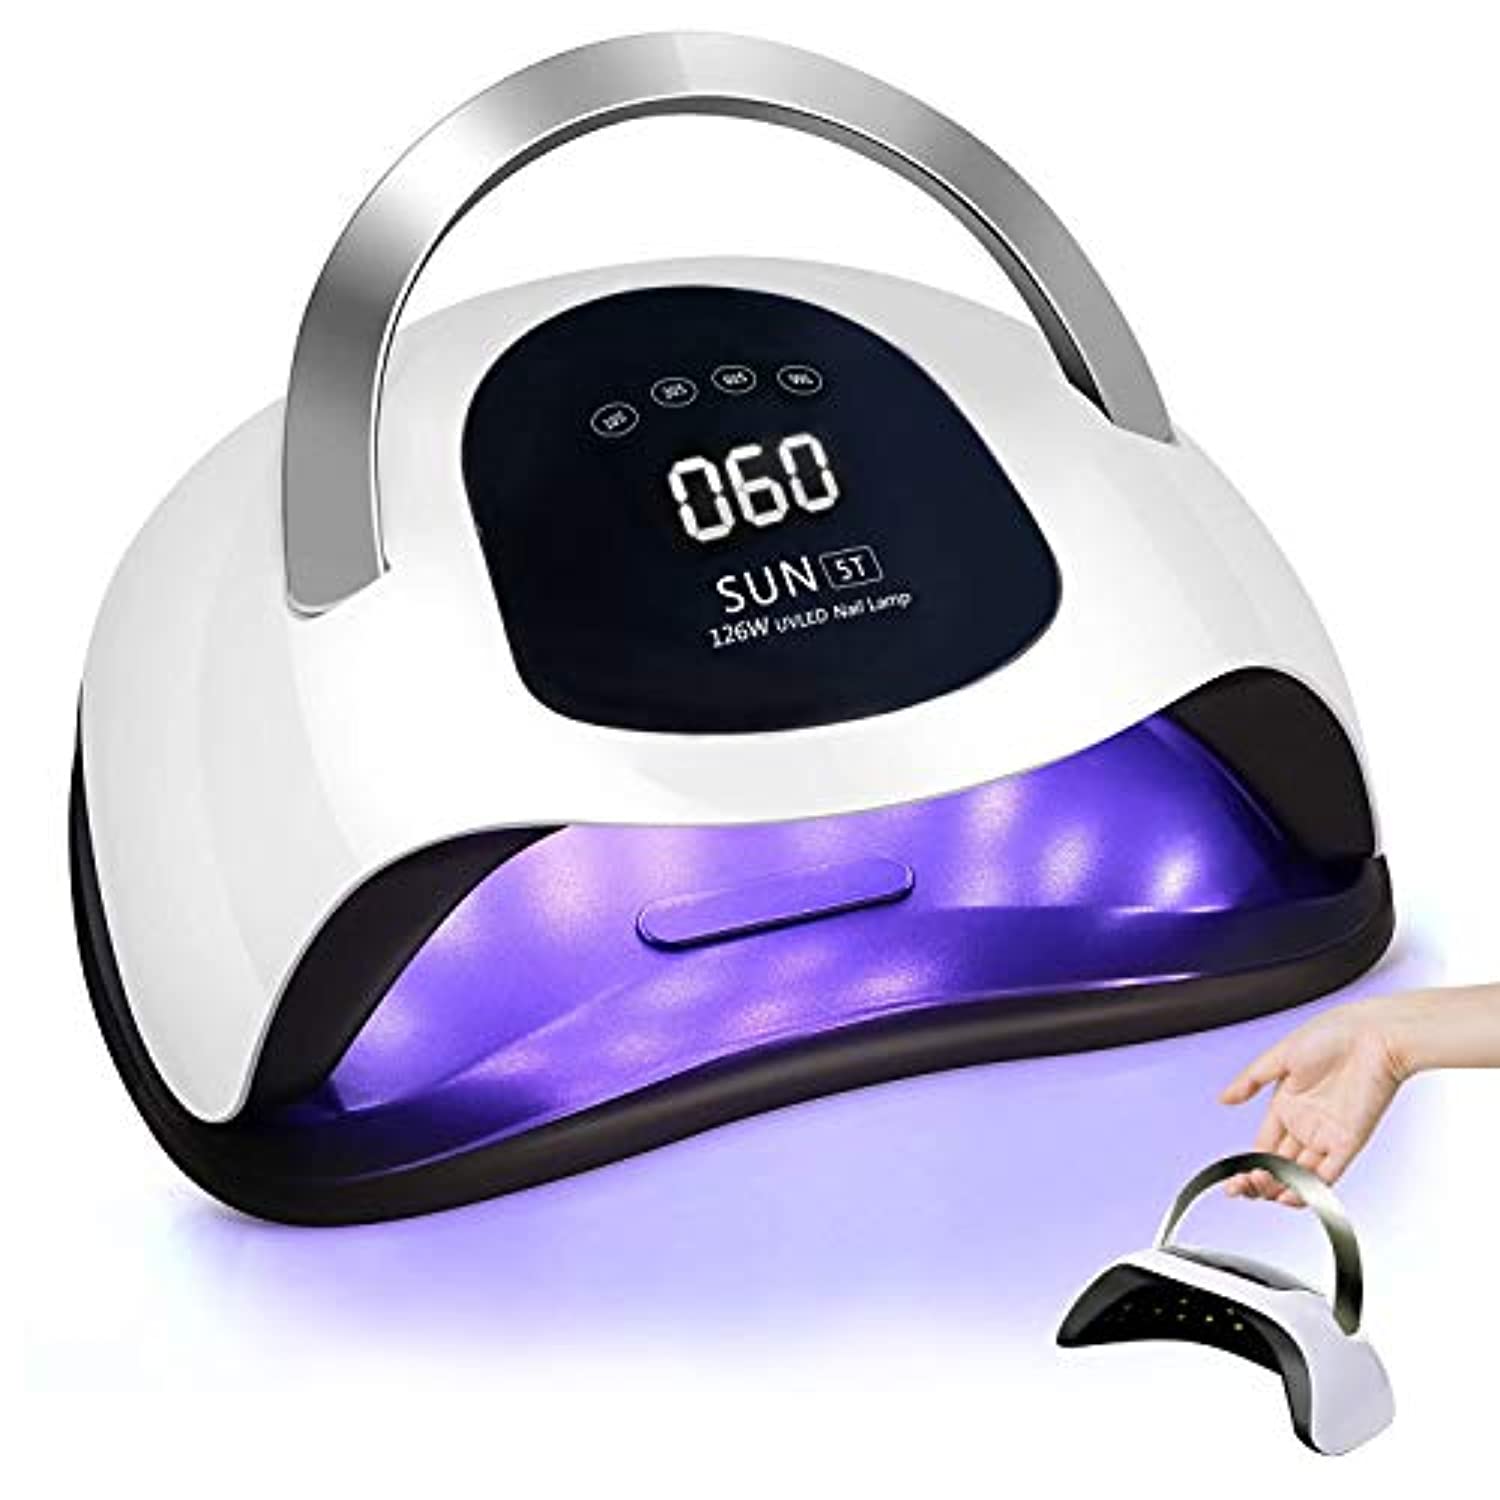 126W UV LED Nail Lamp, Hirsrian Handle Nail Dryer with 4 Timers Professional Nail Polish Curing Lamp Art Tools with Automatic Sensor